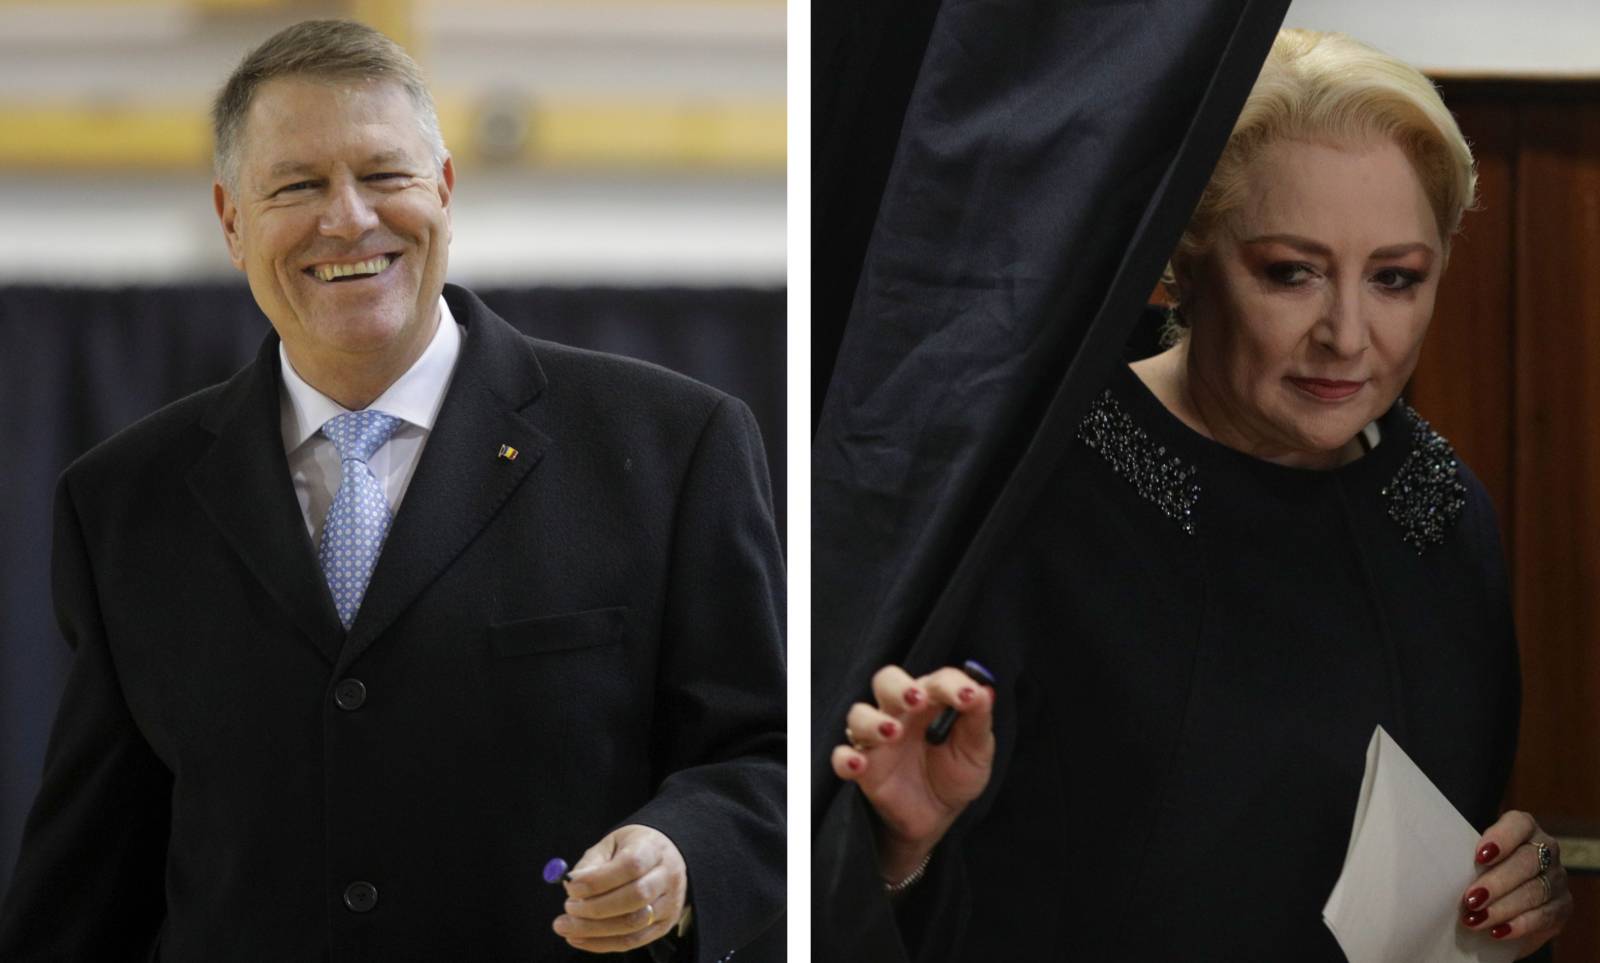 PRESIDENTIAL ELECTION RESULTS EXIT POLL FINAL KLAUS IOHANNIS VIORICA DANCILA